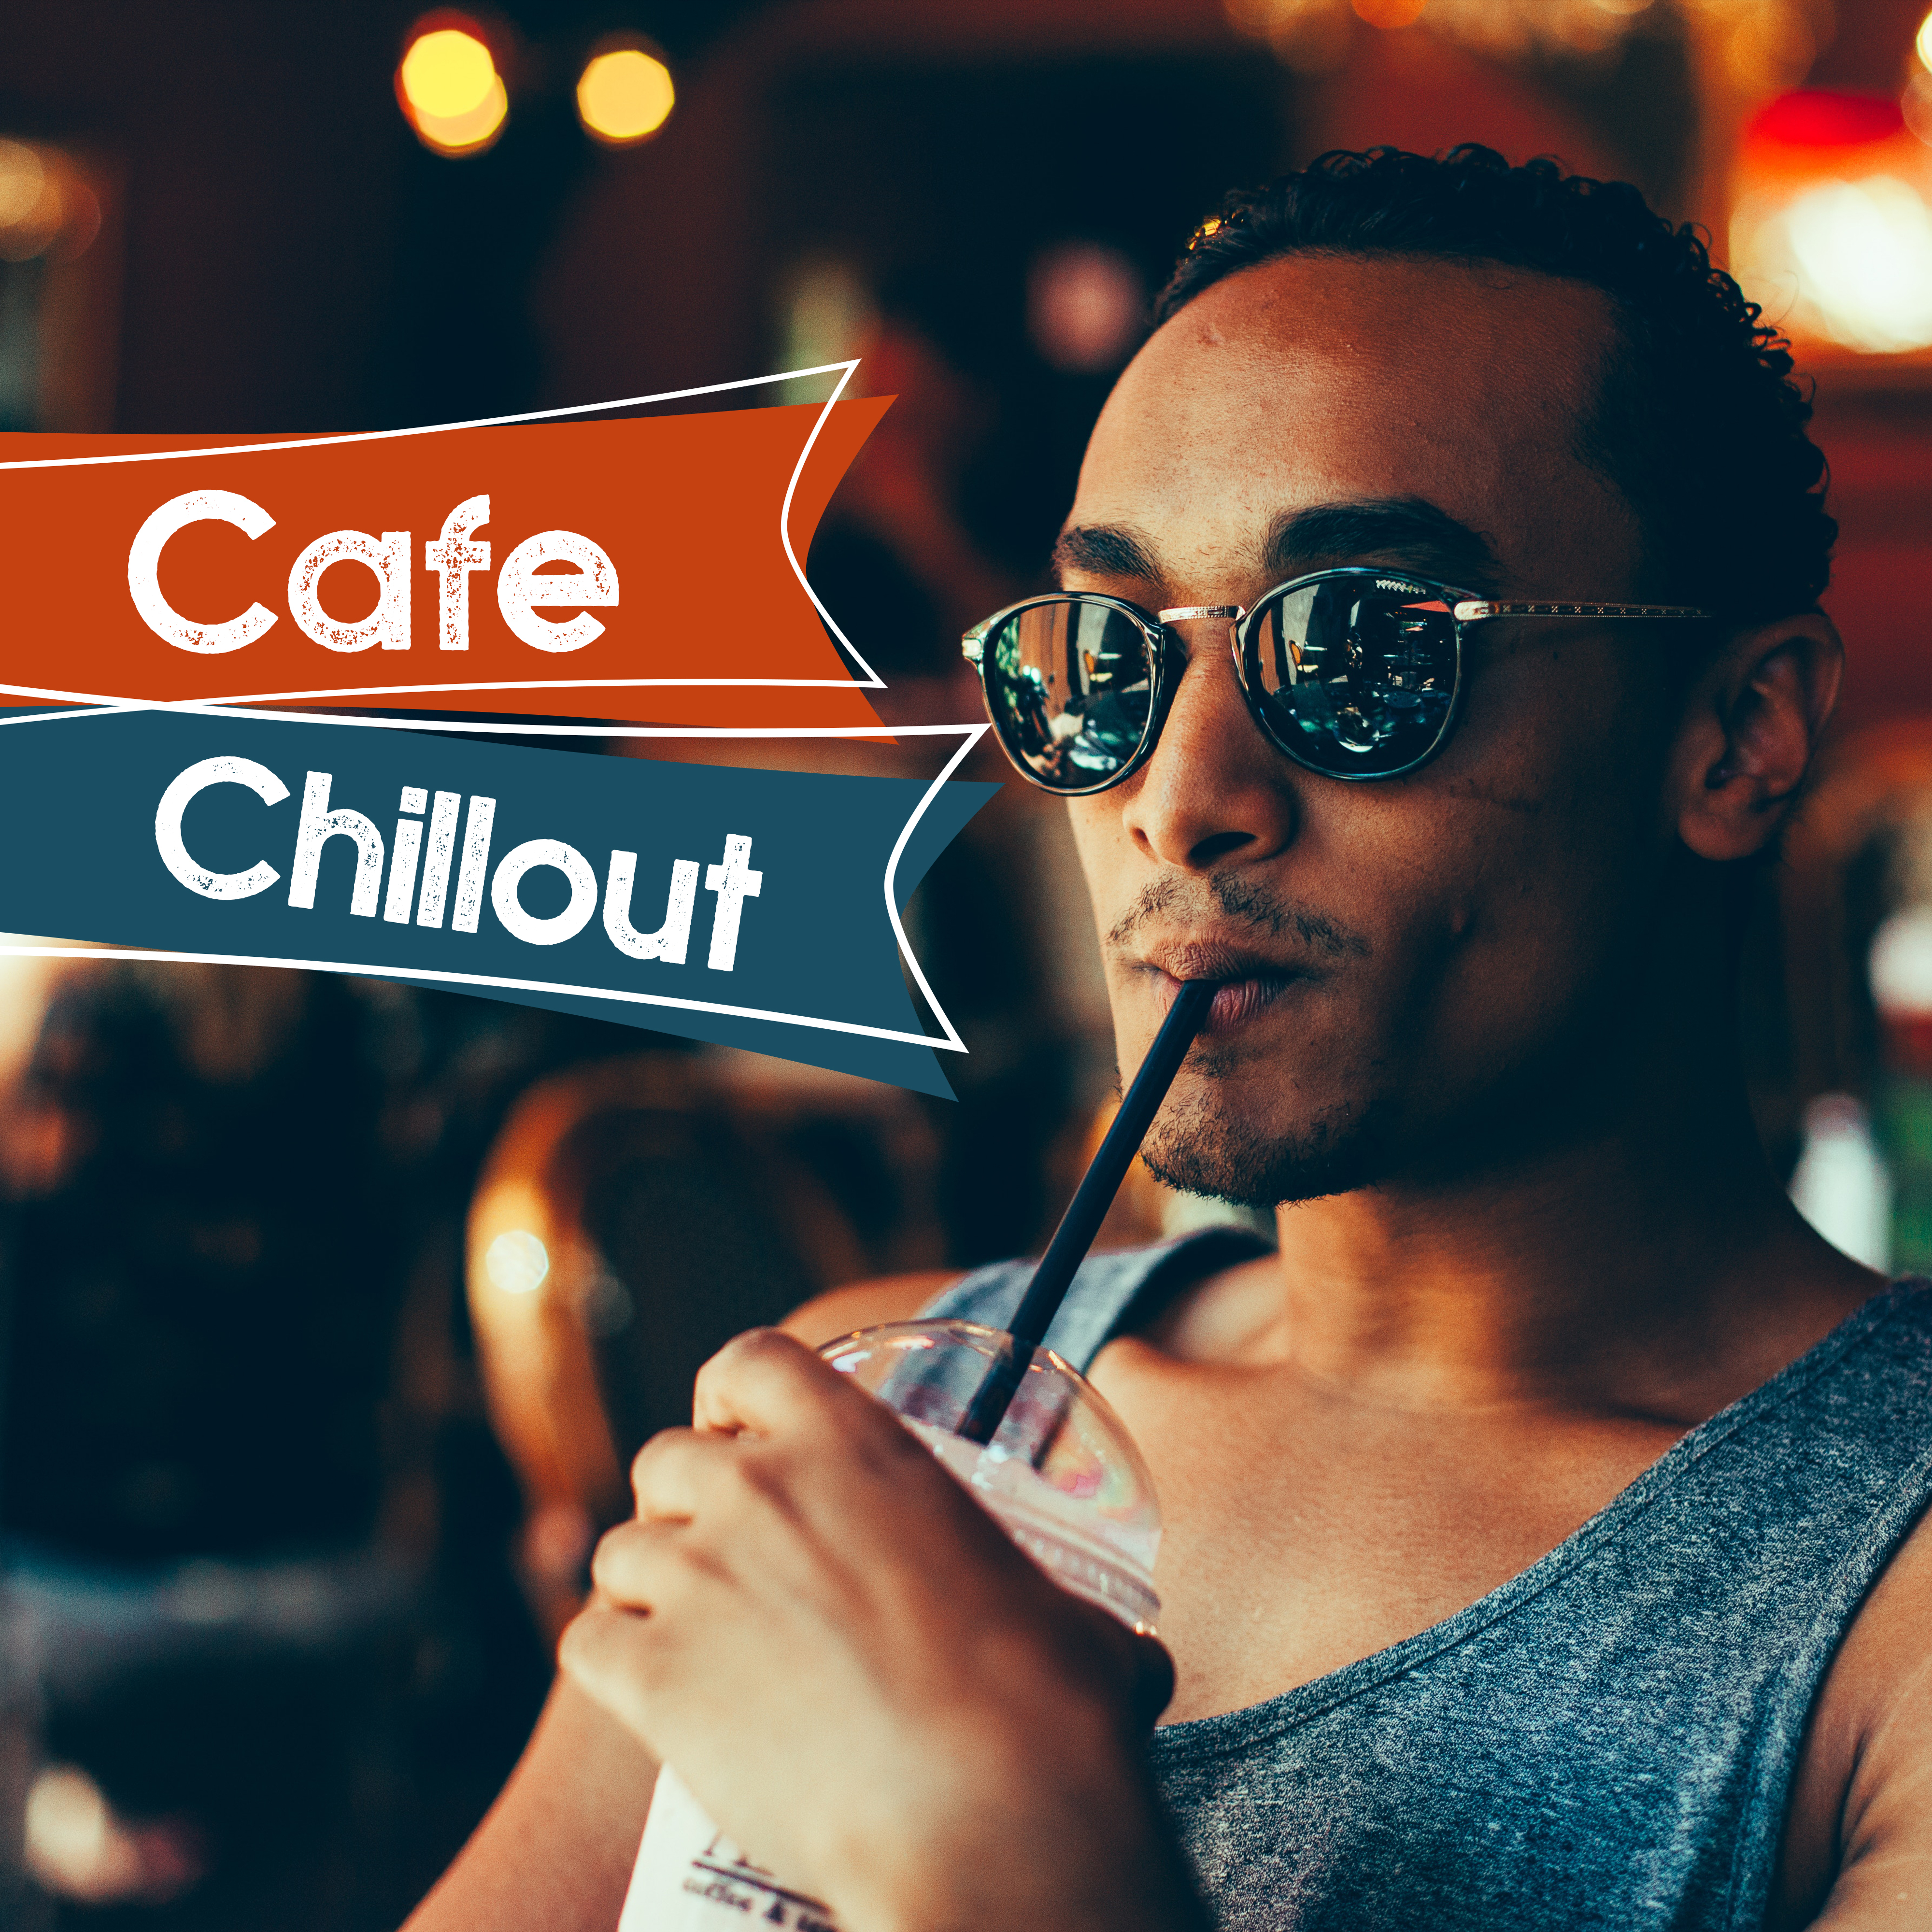 Cafe Chillout